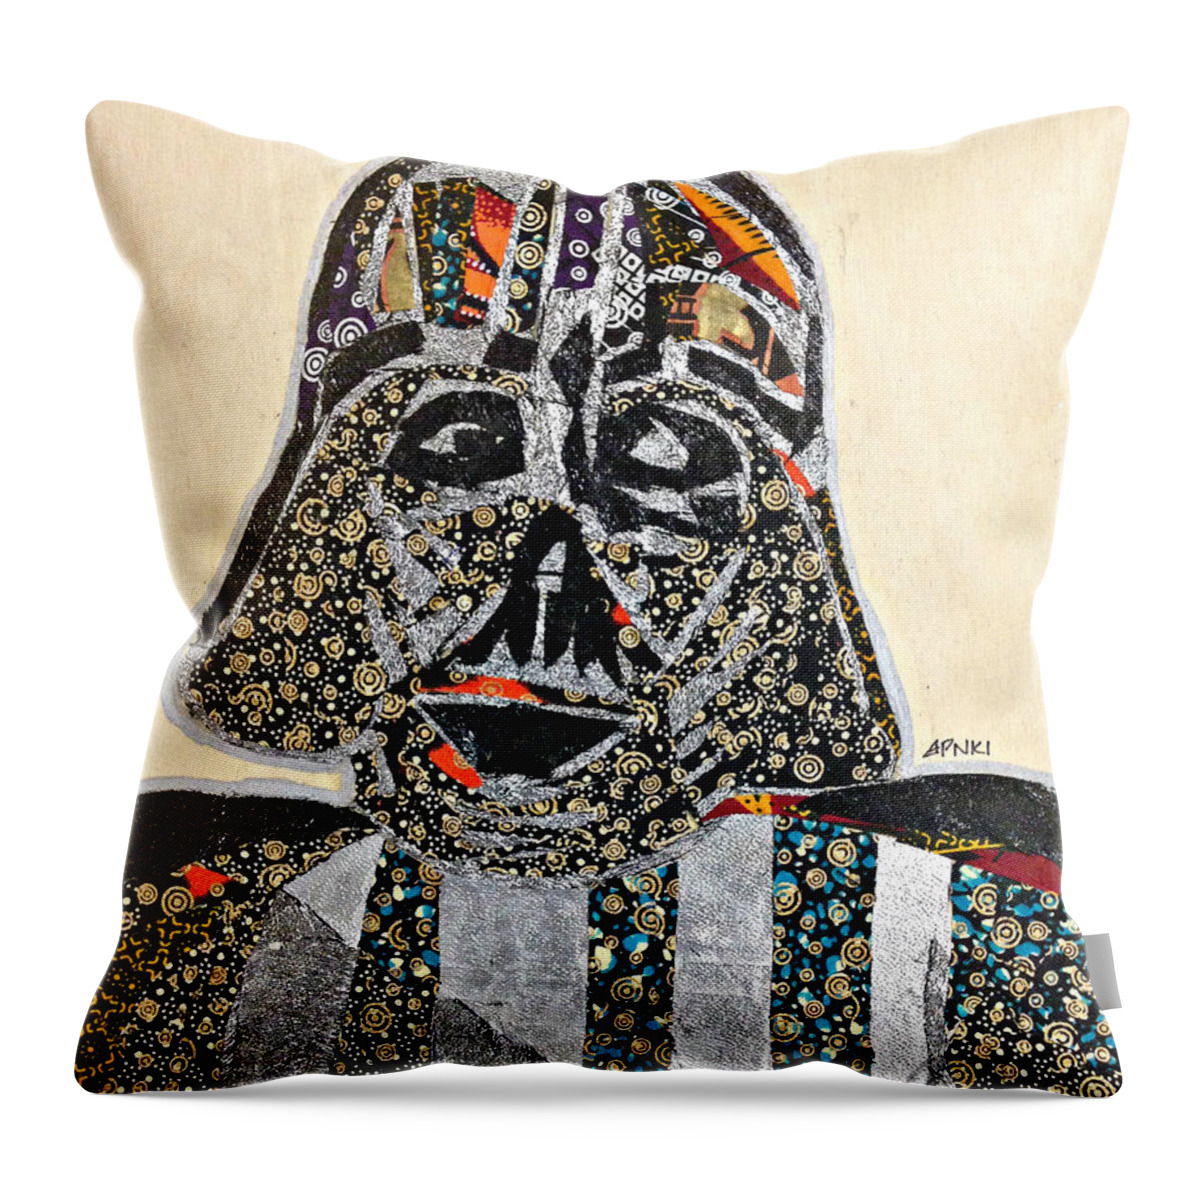 Darth Vader Throw Pillow featuring the tapestry - textile Darth Vader Star Wars Afrofuturist Collection by Apanaki Temitayo M